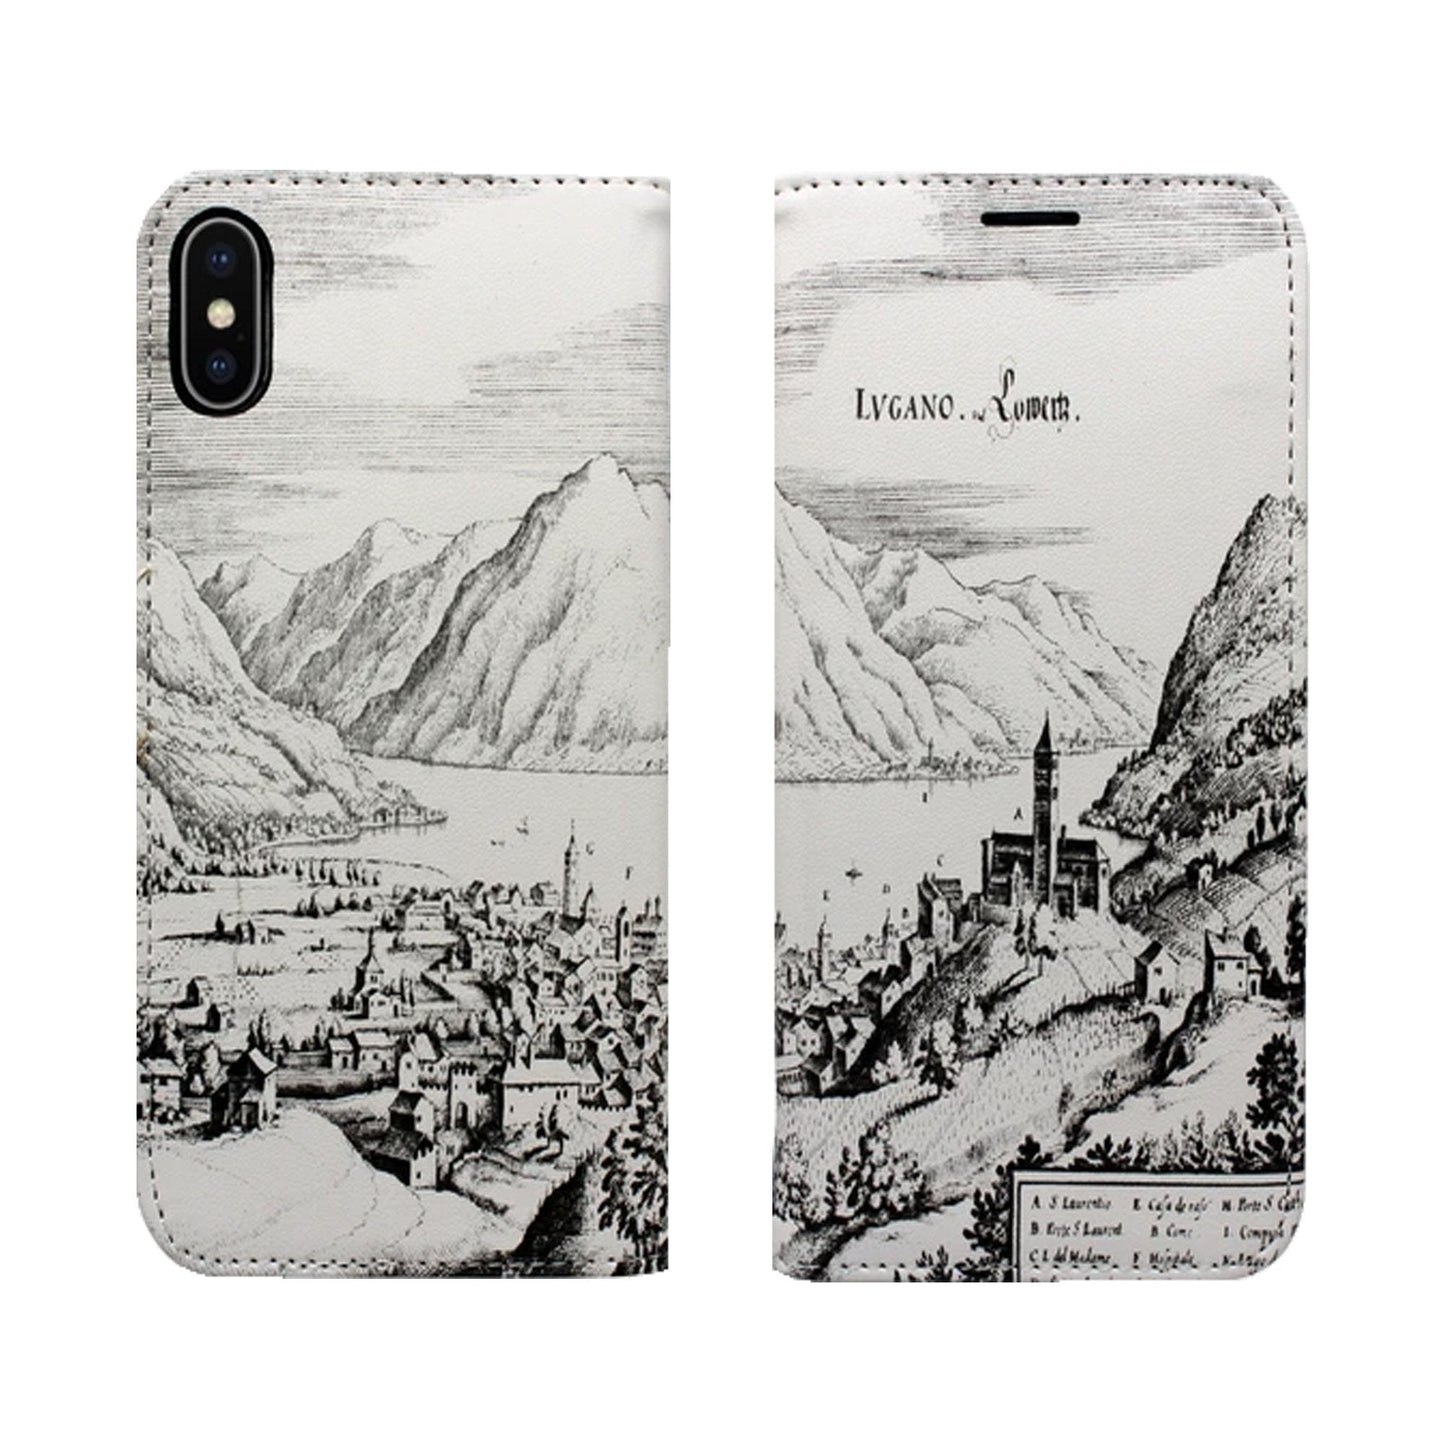 Lugano Merian Panorama Case for iPhone and Samsung